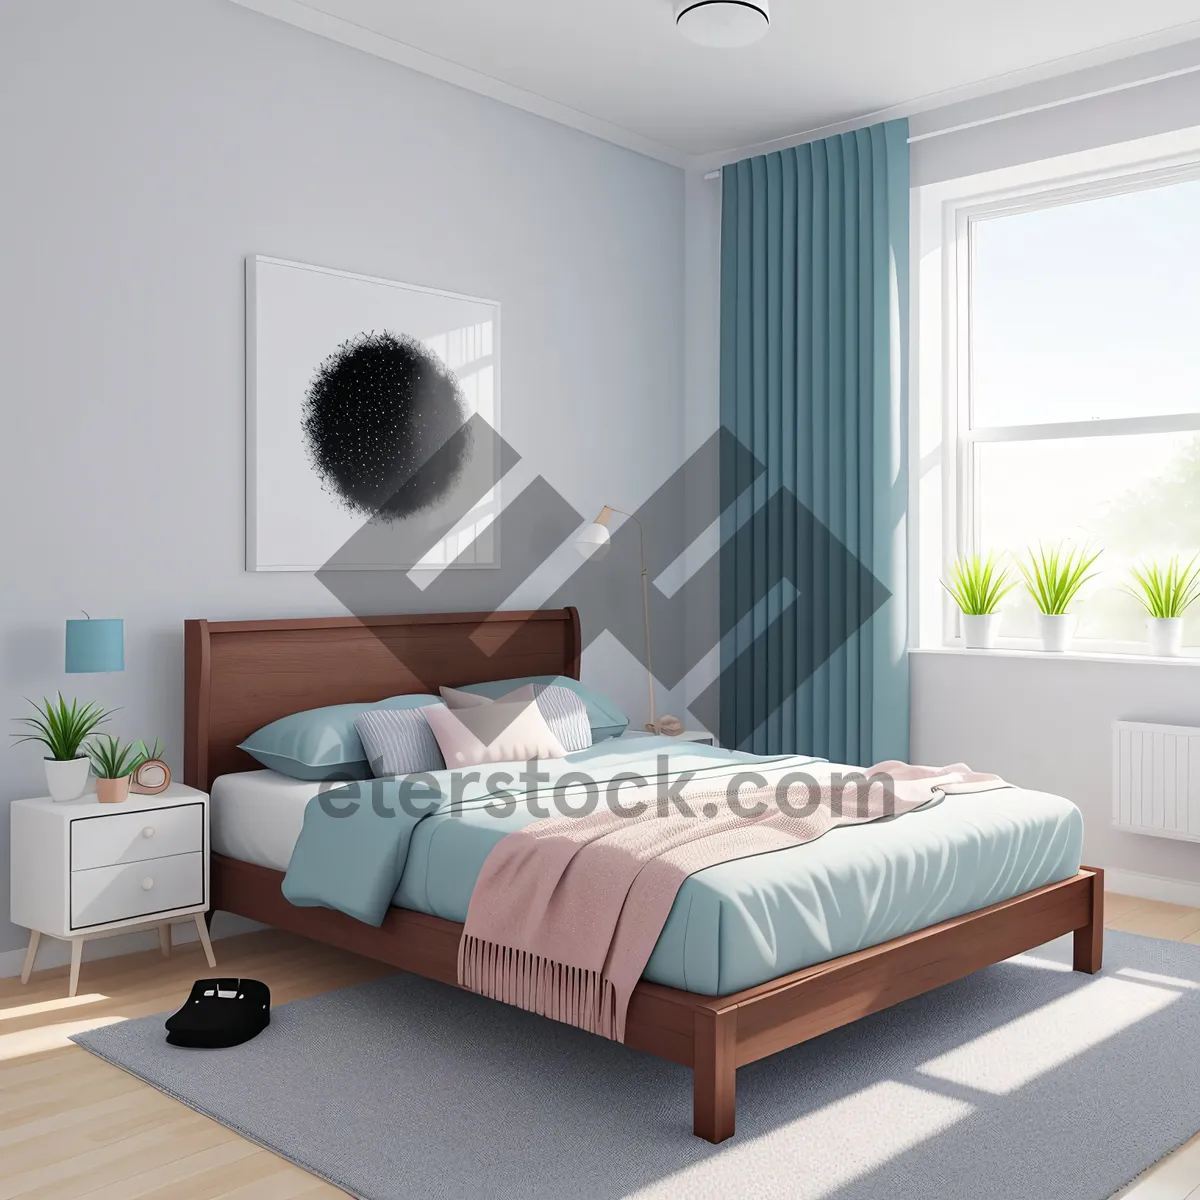 Picture of Modern bedroom with cozy interior and stylish furniture